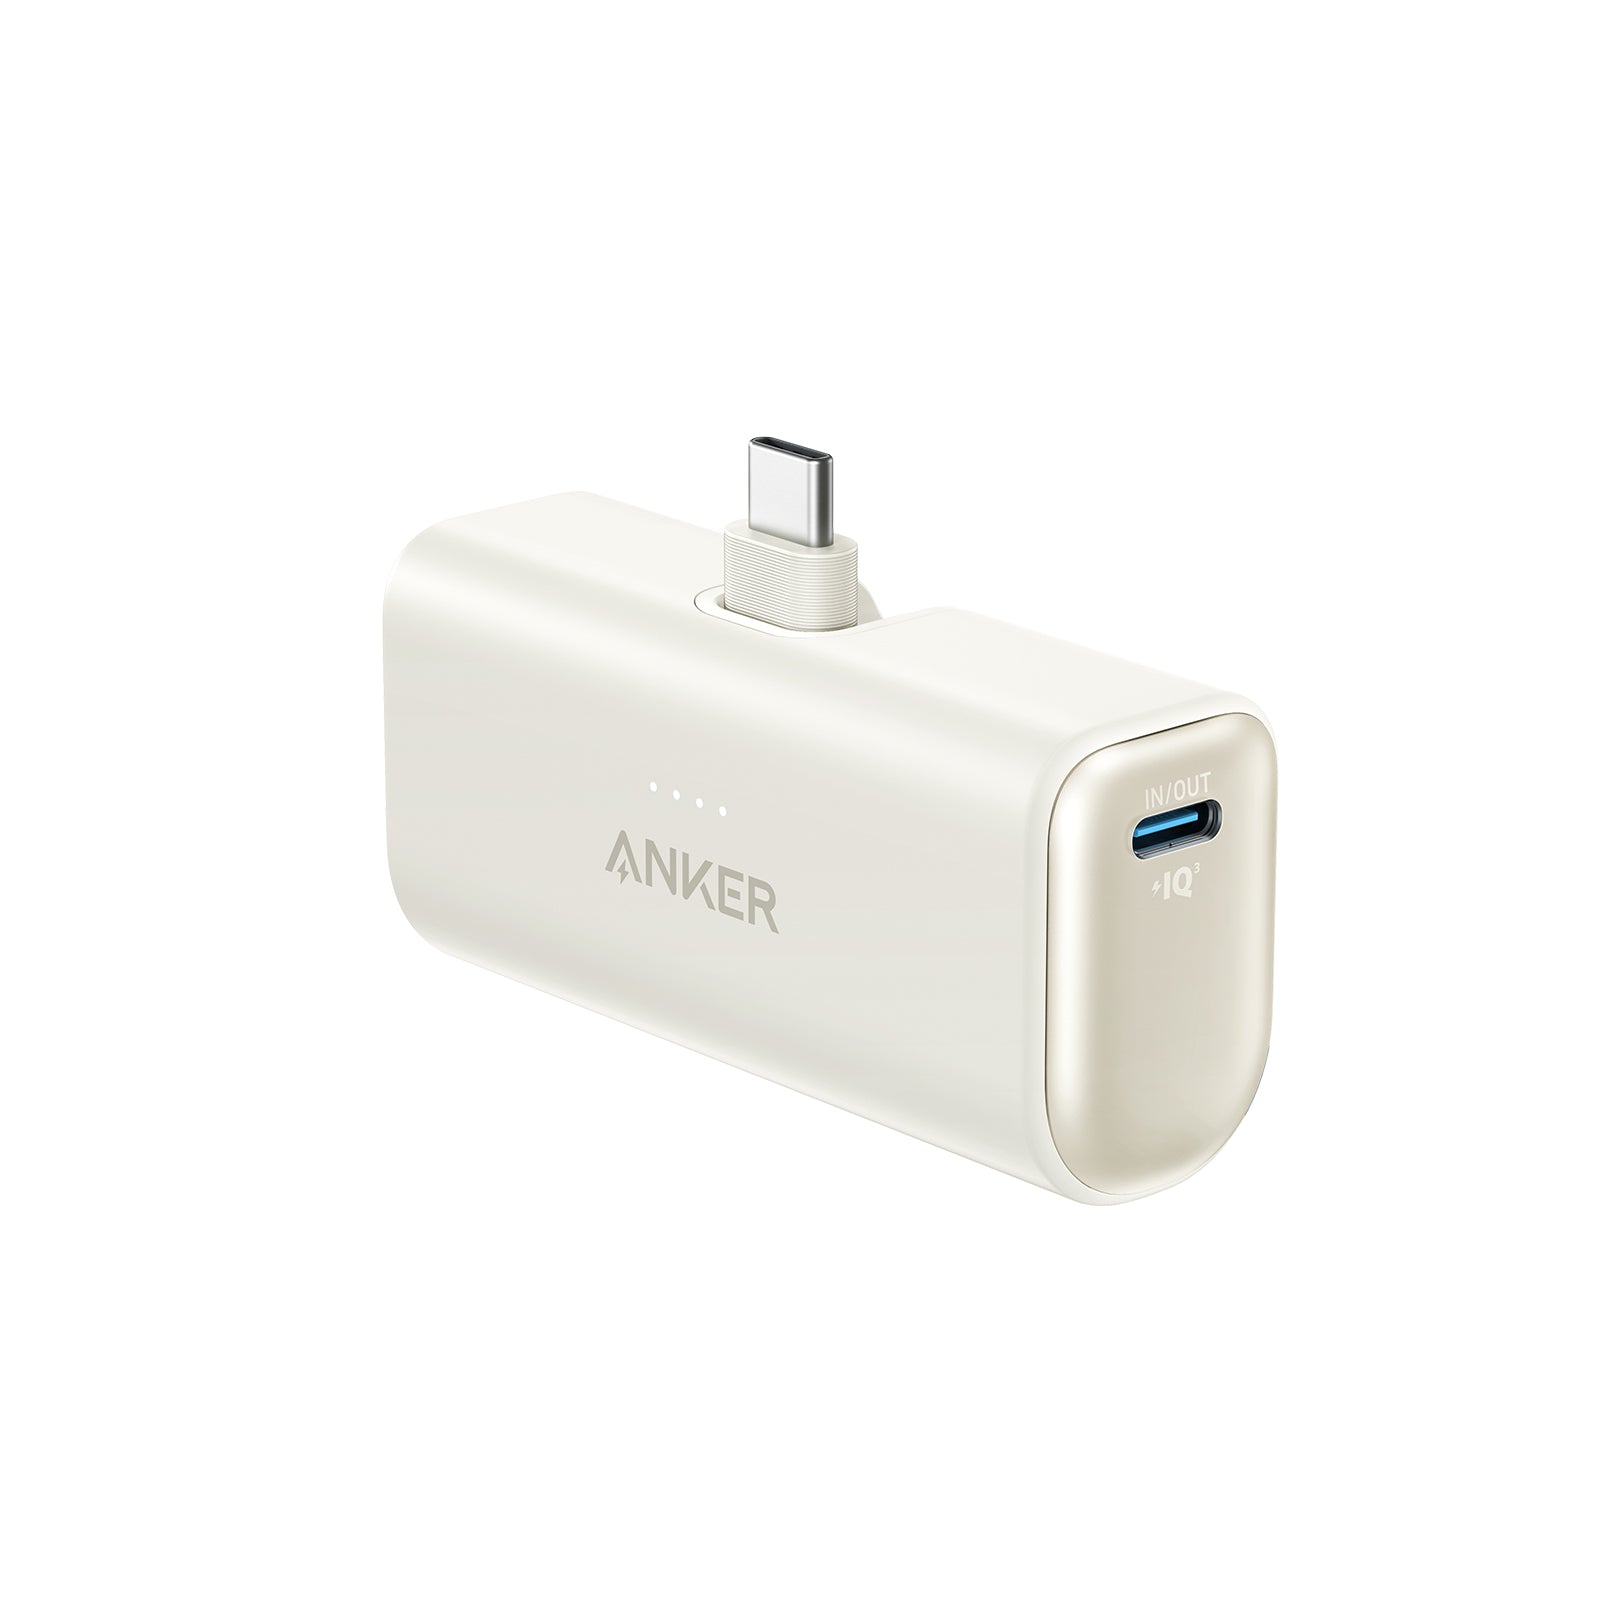 Anker Nano 5000mAh 22.5W Power Bank with Built-in USB-C Connector - Black